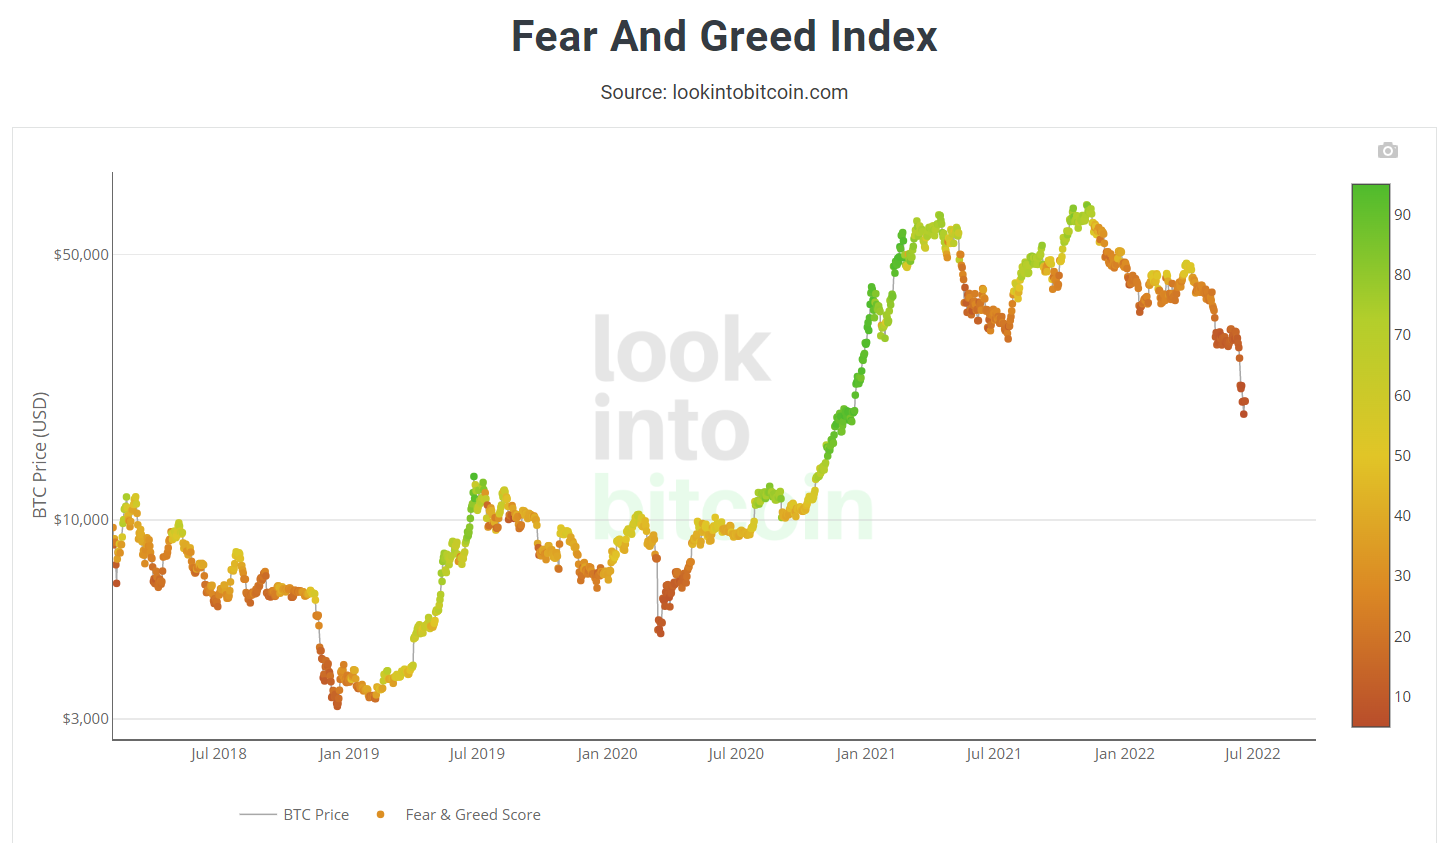 Fear &amp; Greed Index at March 2020 levels.